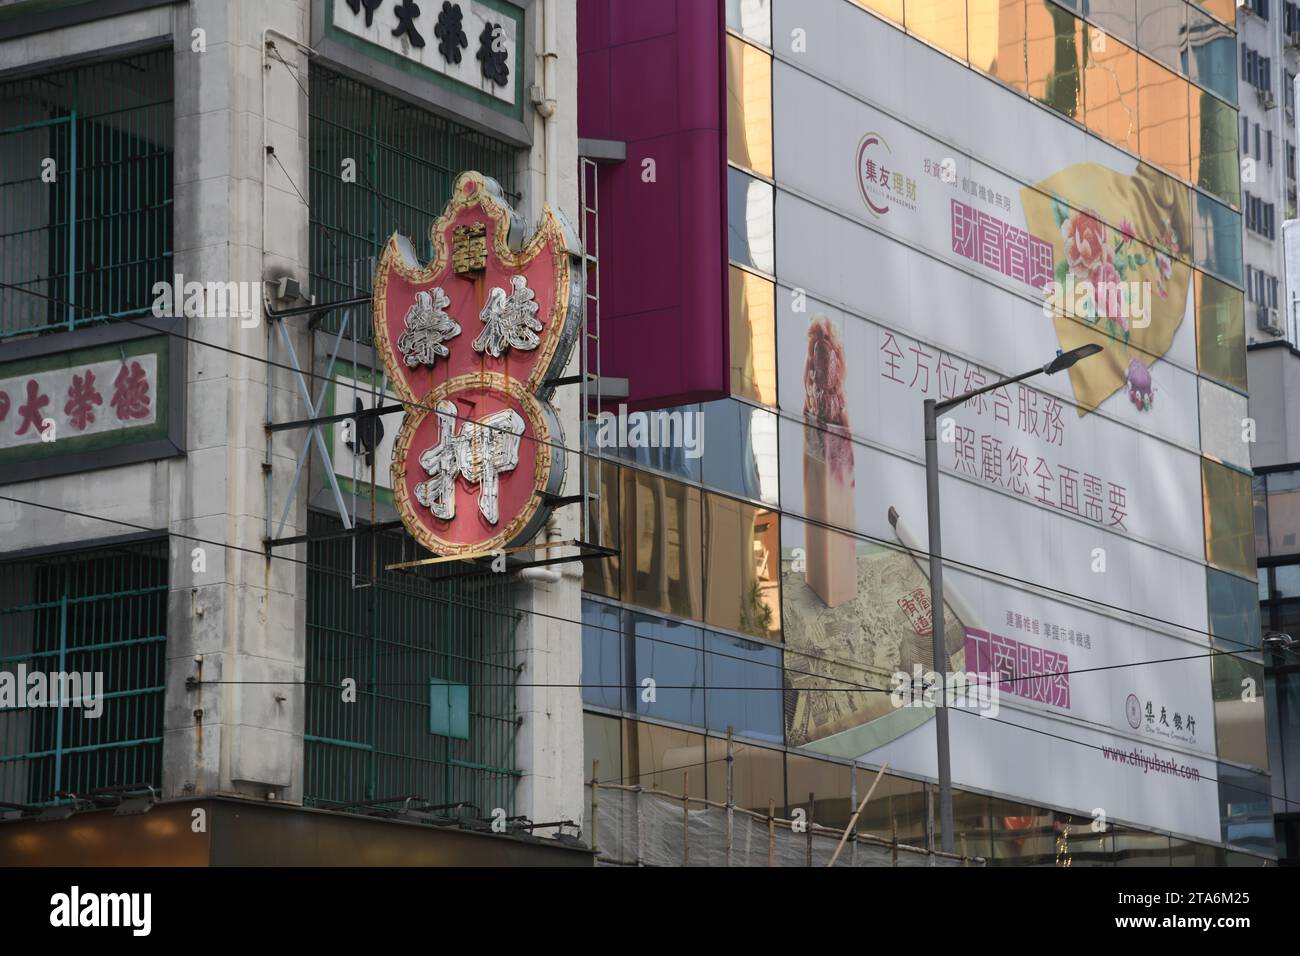 Facade of old buildings with street signs in Central area in Hong Kong Stock Photo